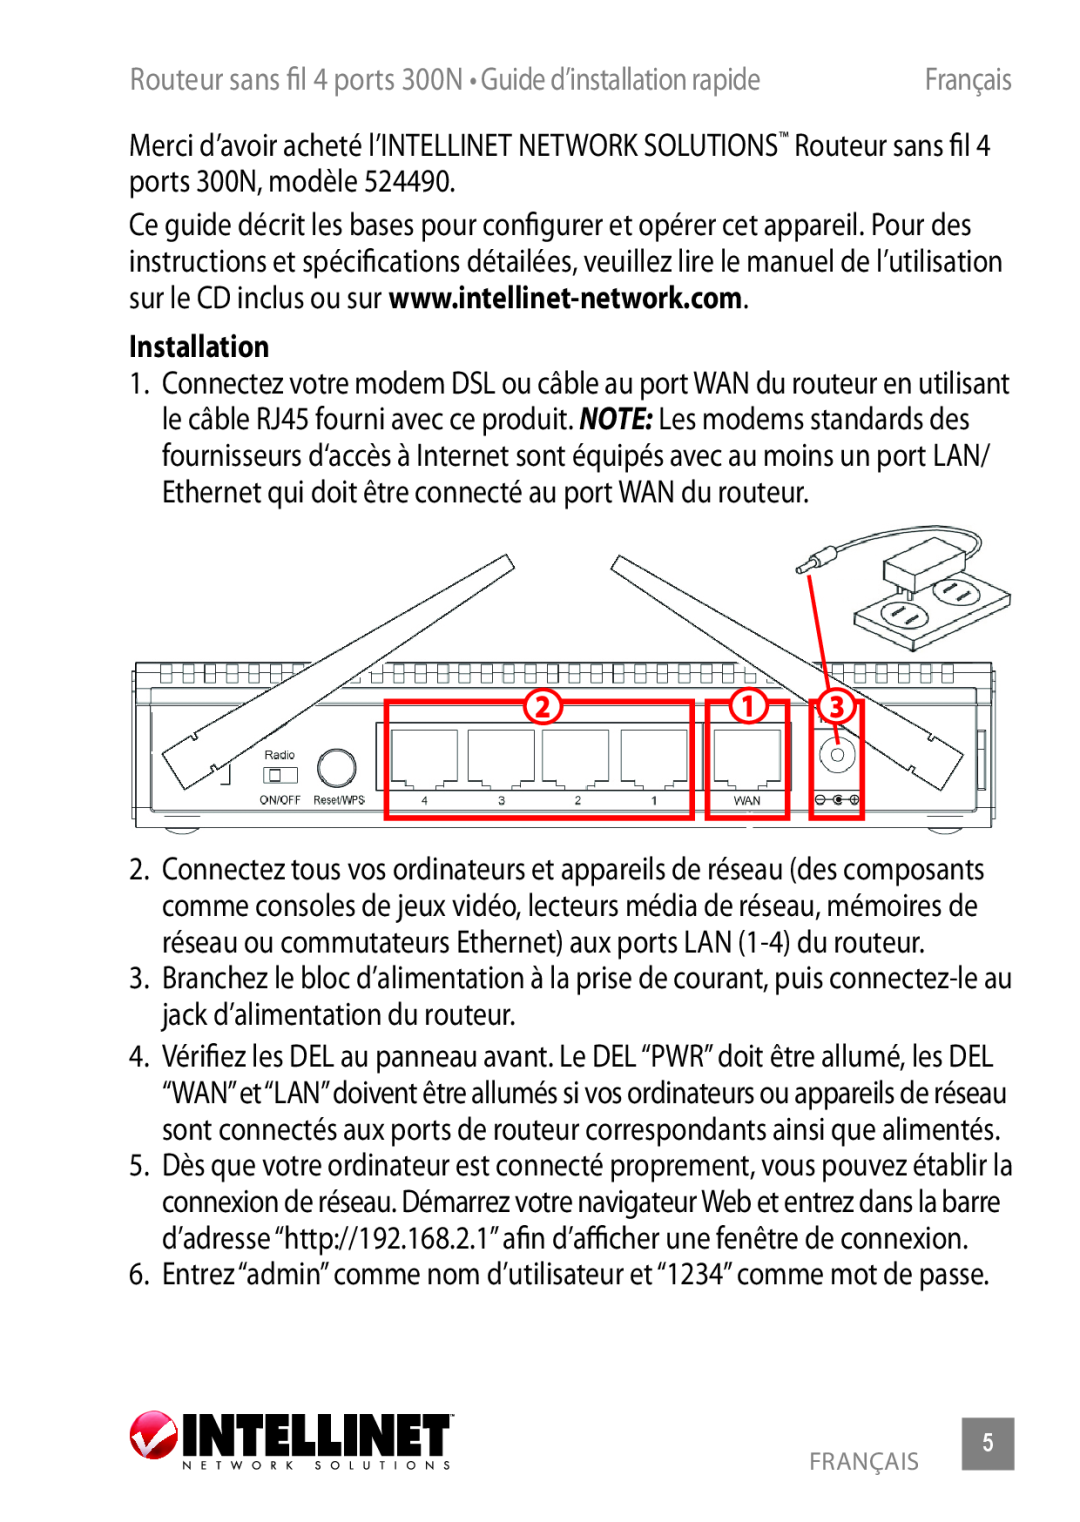 Intellinet Network Solutions Model 524490 manual Routeur sans fil 4 ports 300N Guide d’installation rapide, Installation 